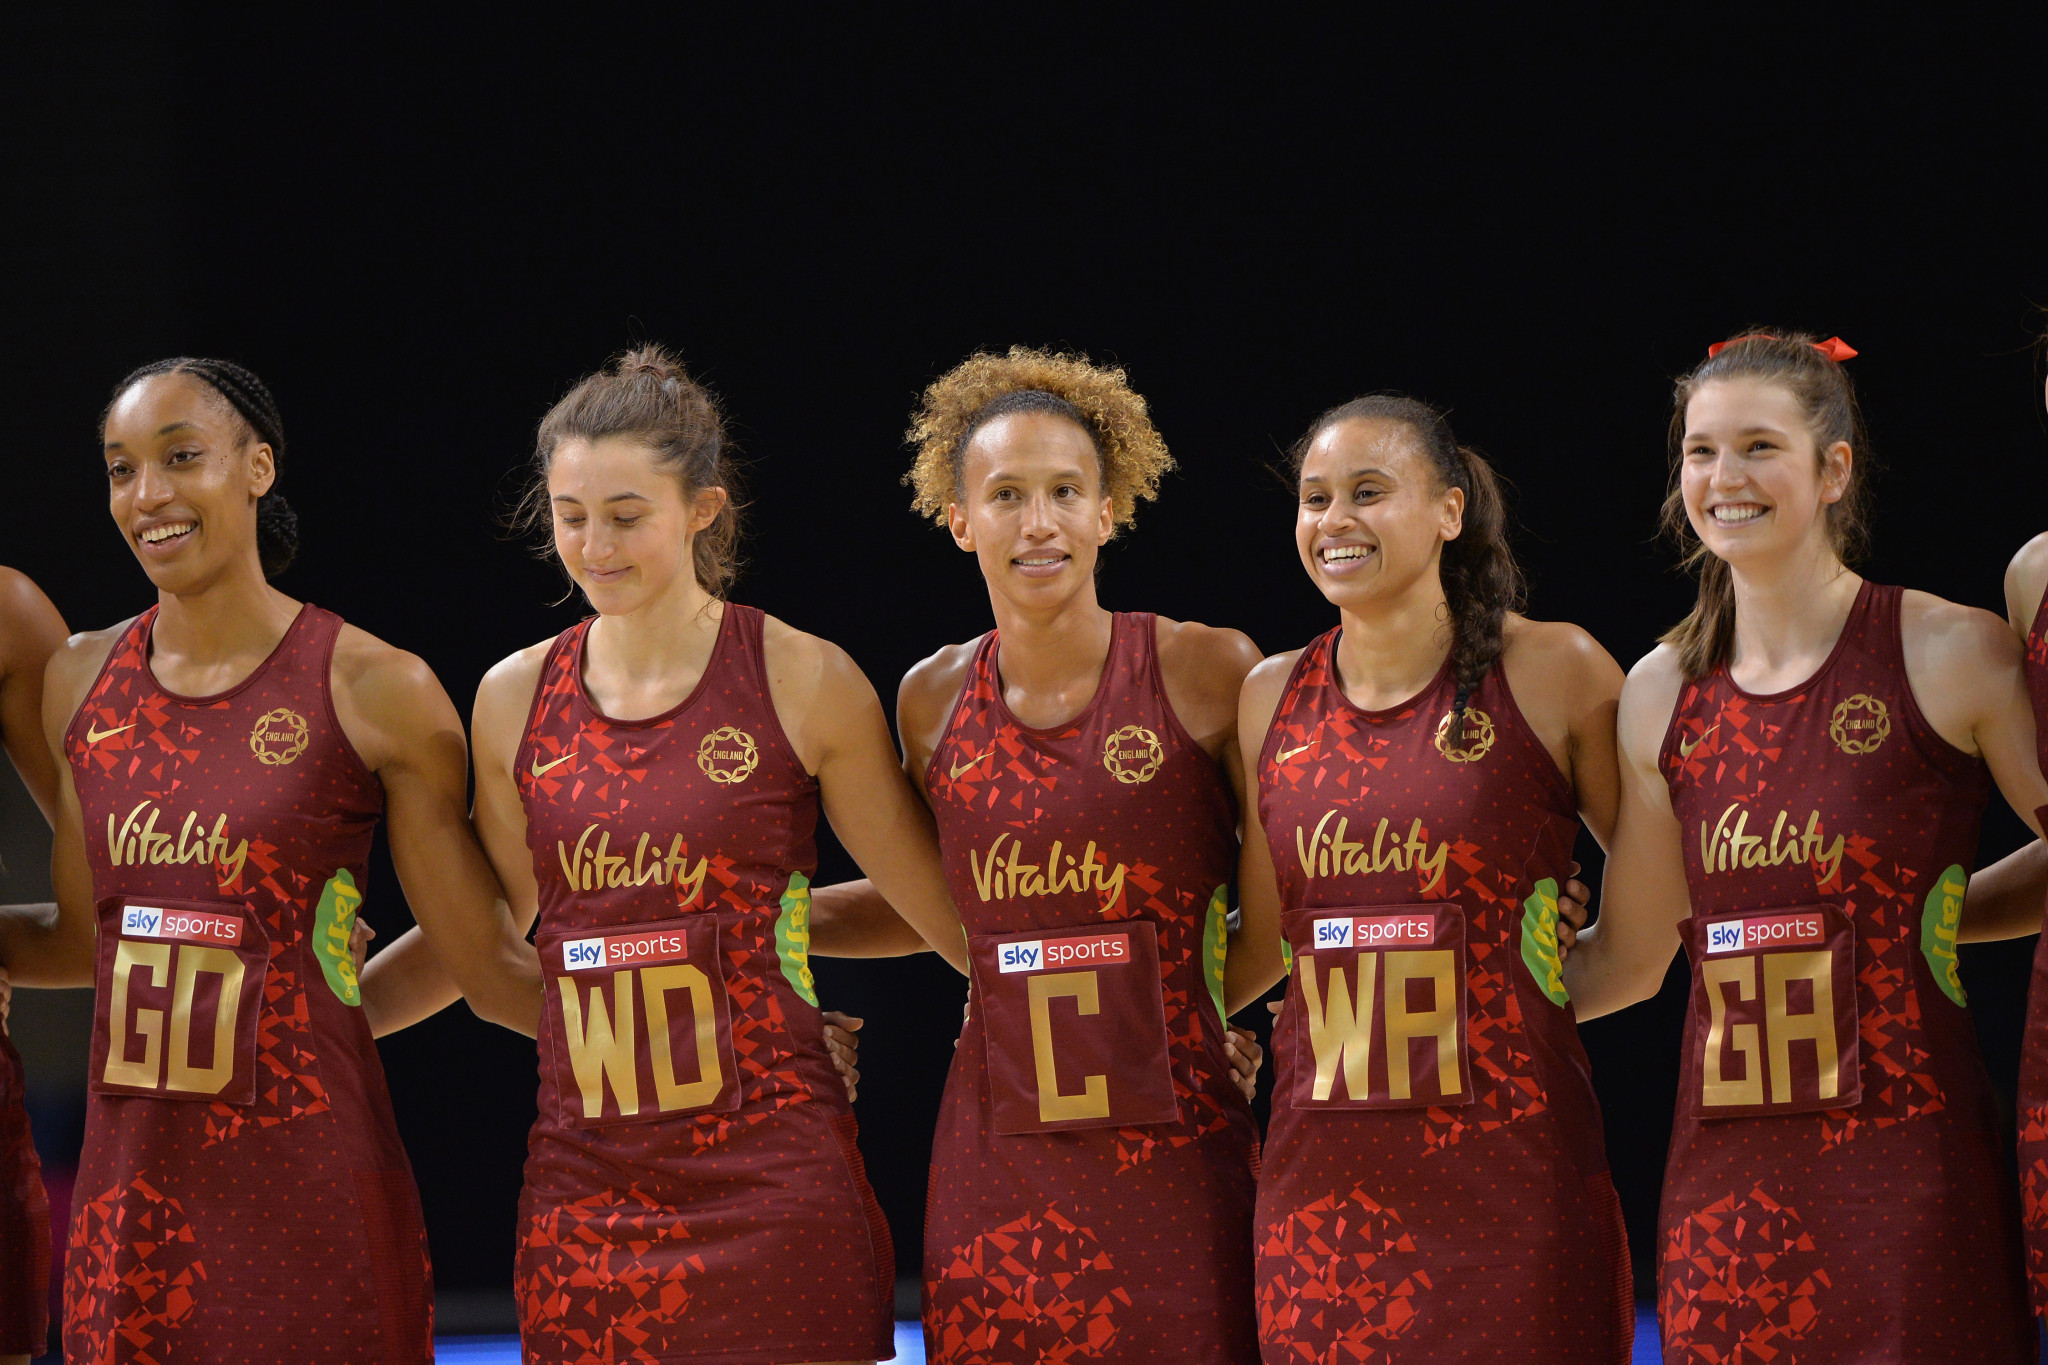 England to host Australia, New Zealand and South Africa in January for Netball Quad Series